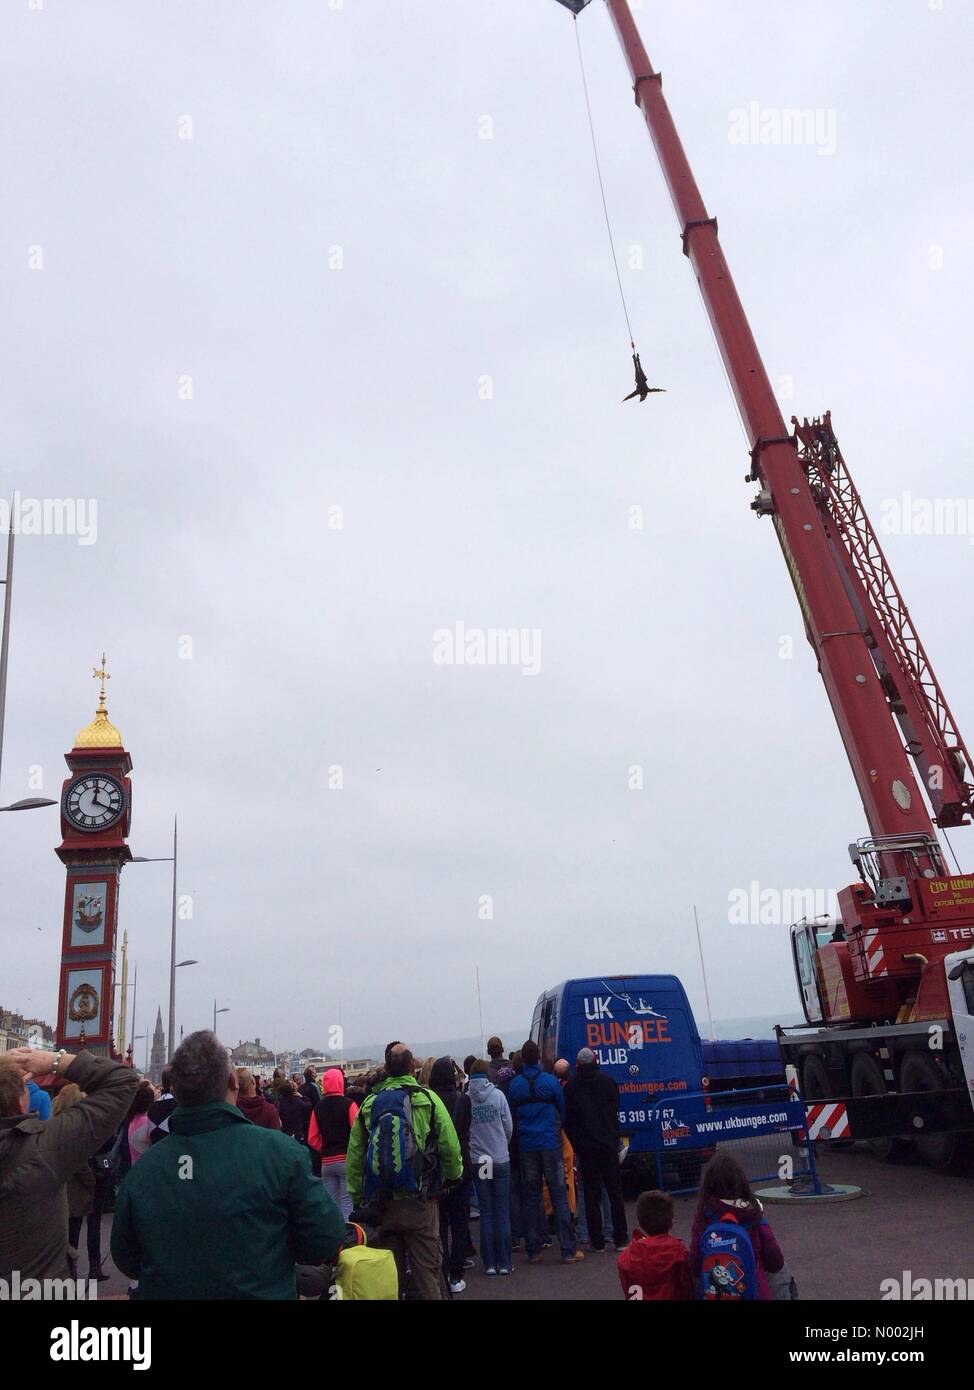 Weymouth, Dorset, UK. 02nd May, 2015. As part of the Weymouth Kite Festival for the first time jumpers, including members of the Dorset Blind Society, take part in a charity UK bungee from The Clock Tower at Weymouth. Credit:  Carolyn Jenkins/StockimoNews/Alamy Live News Stock Photo